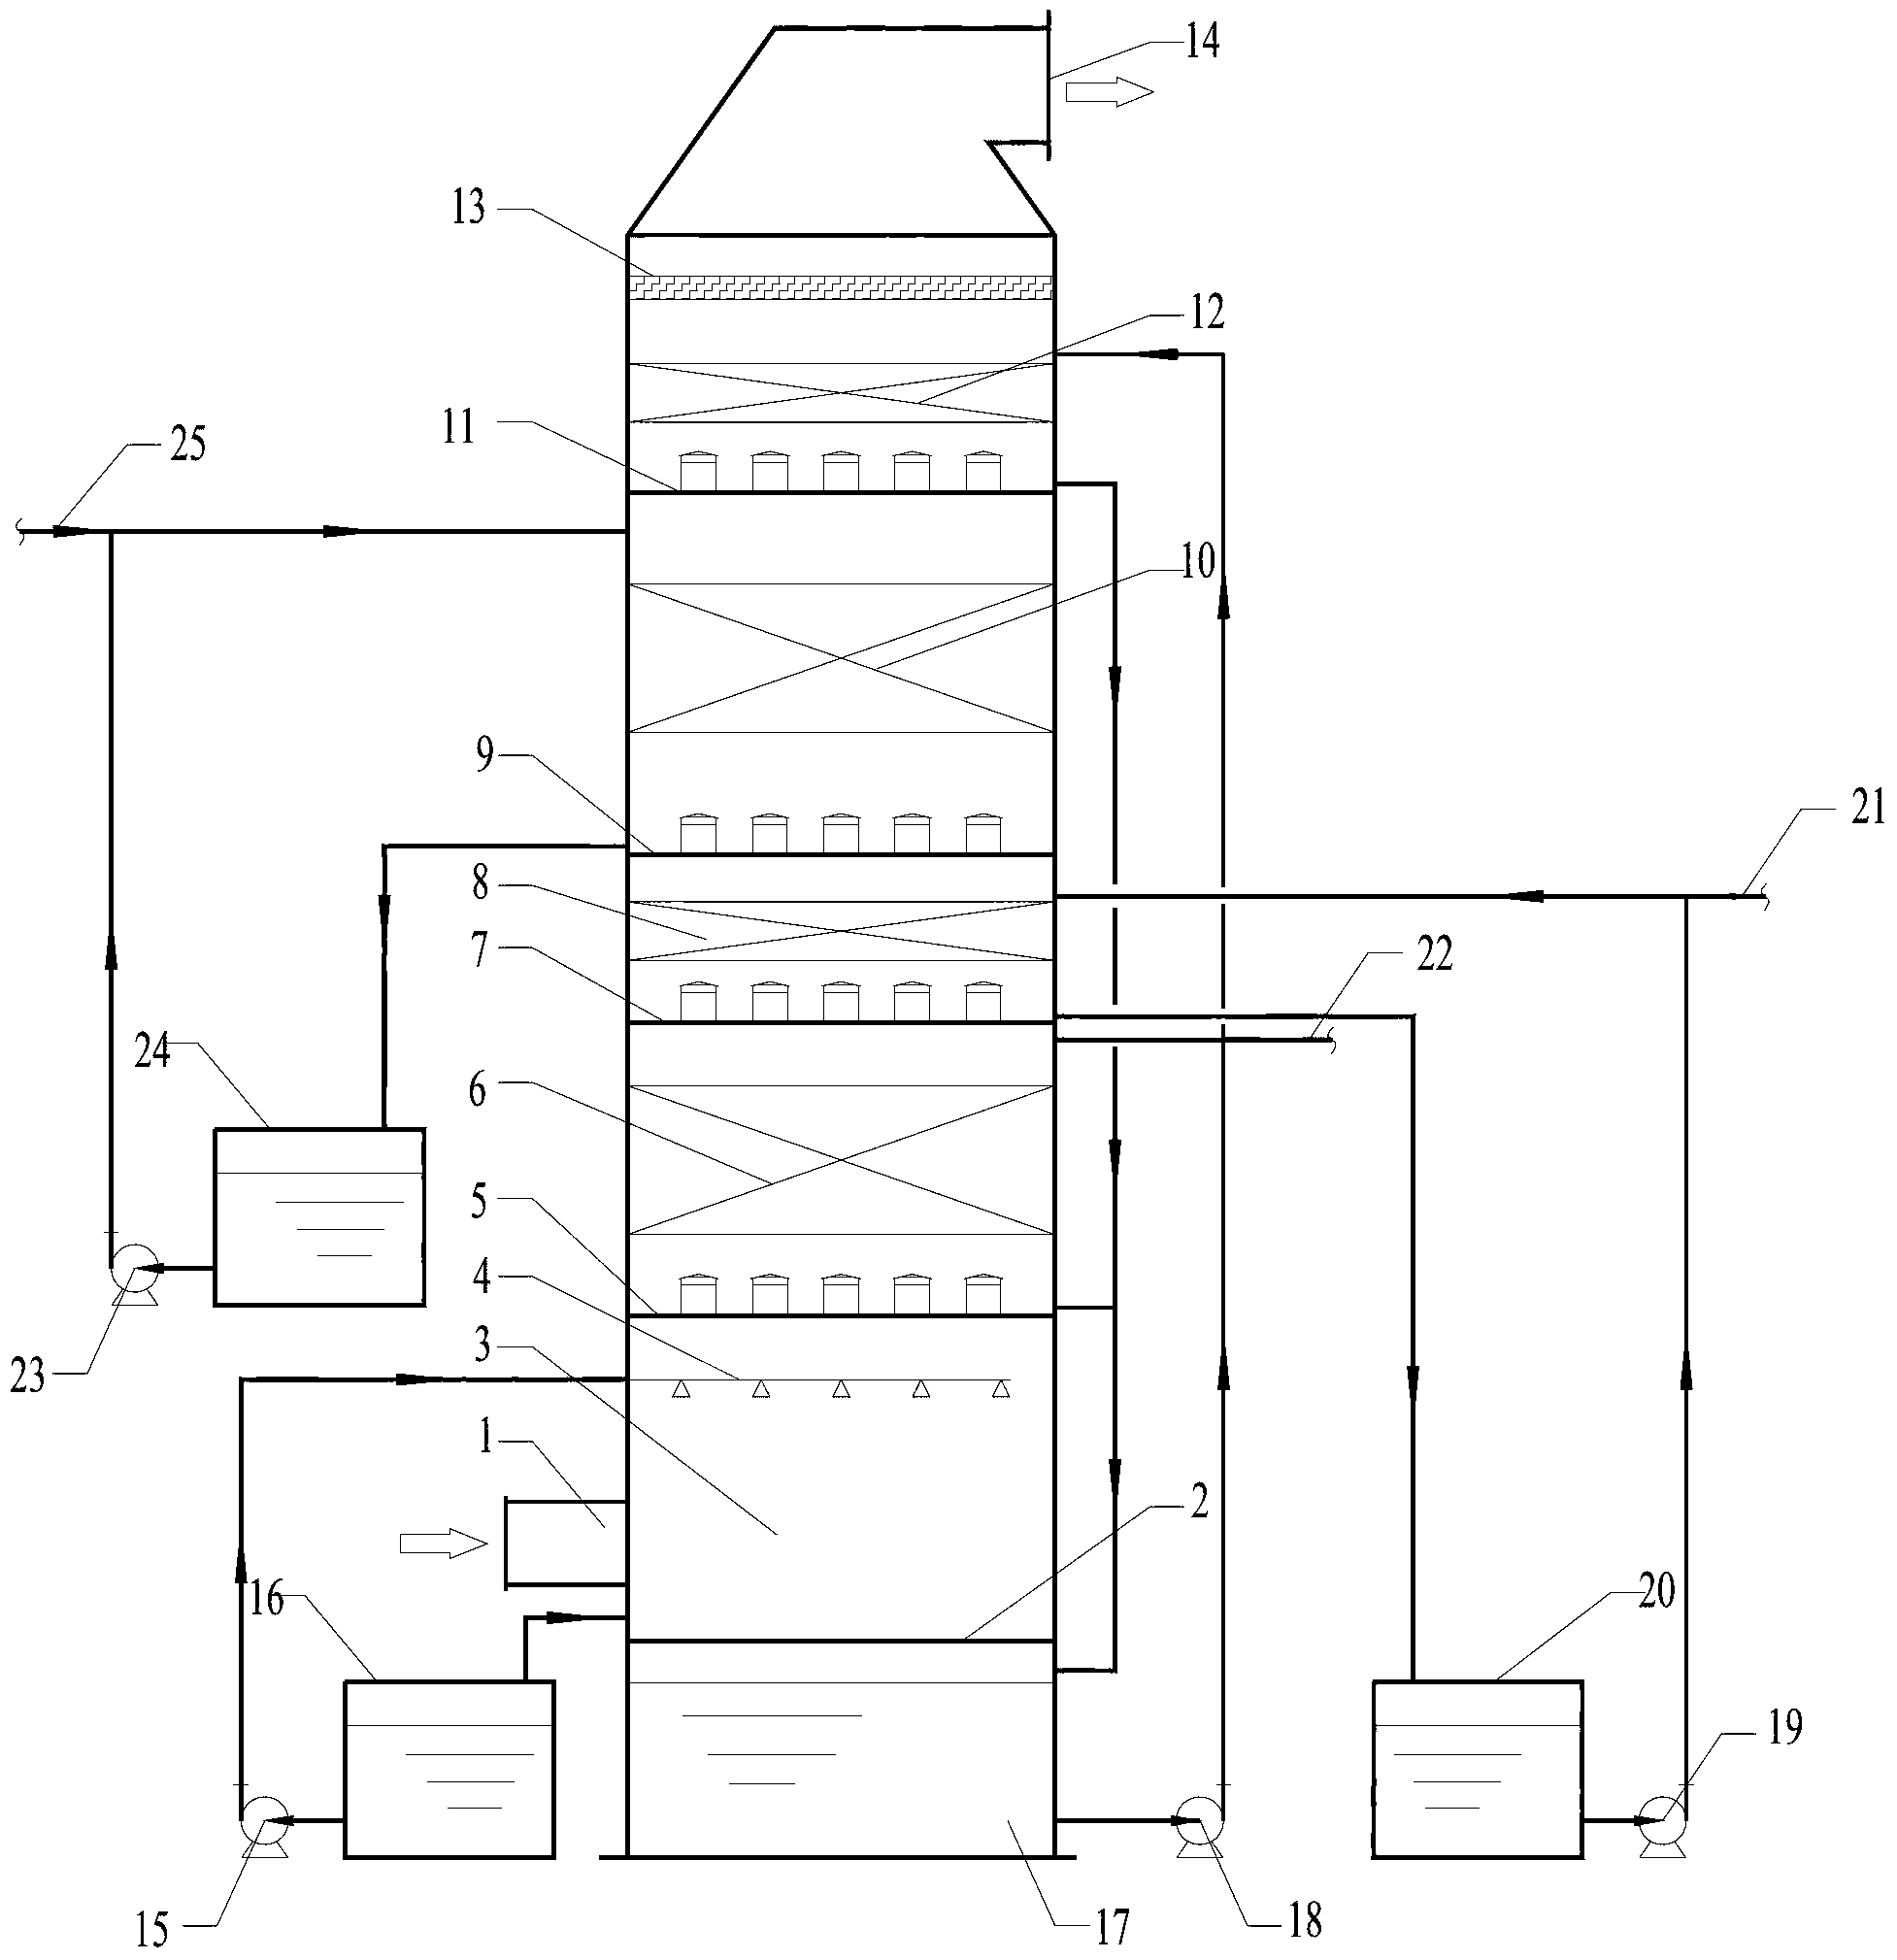 Absorption tower for simultaneously removing sulfur dioxide and nitrogen oxide in smoke